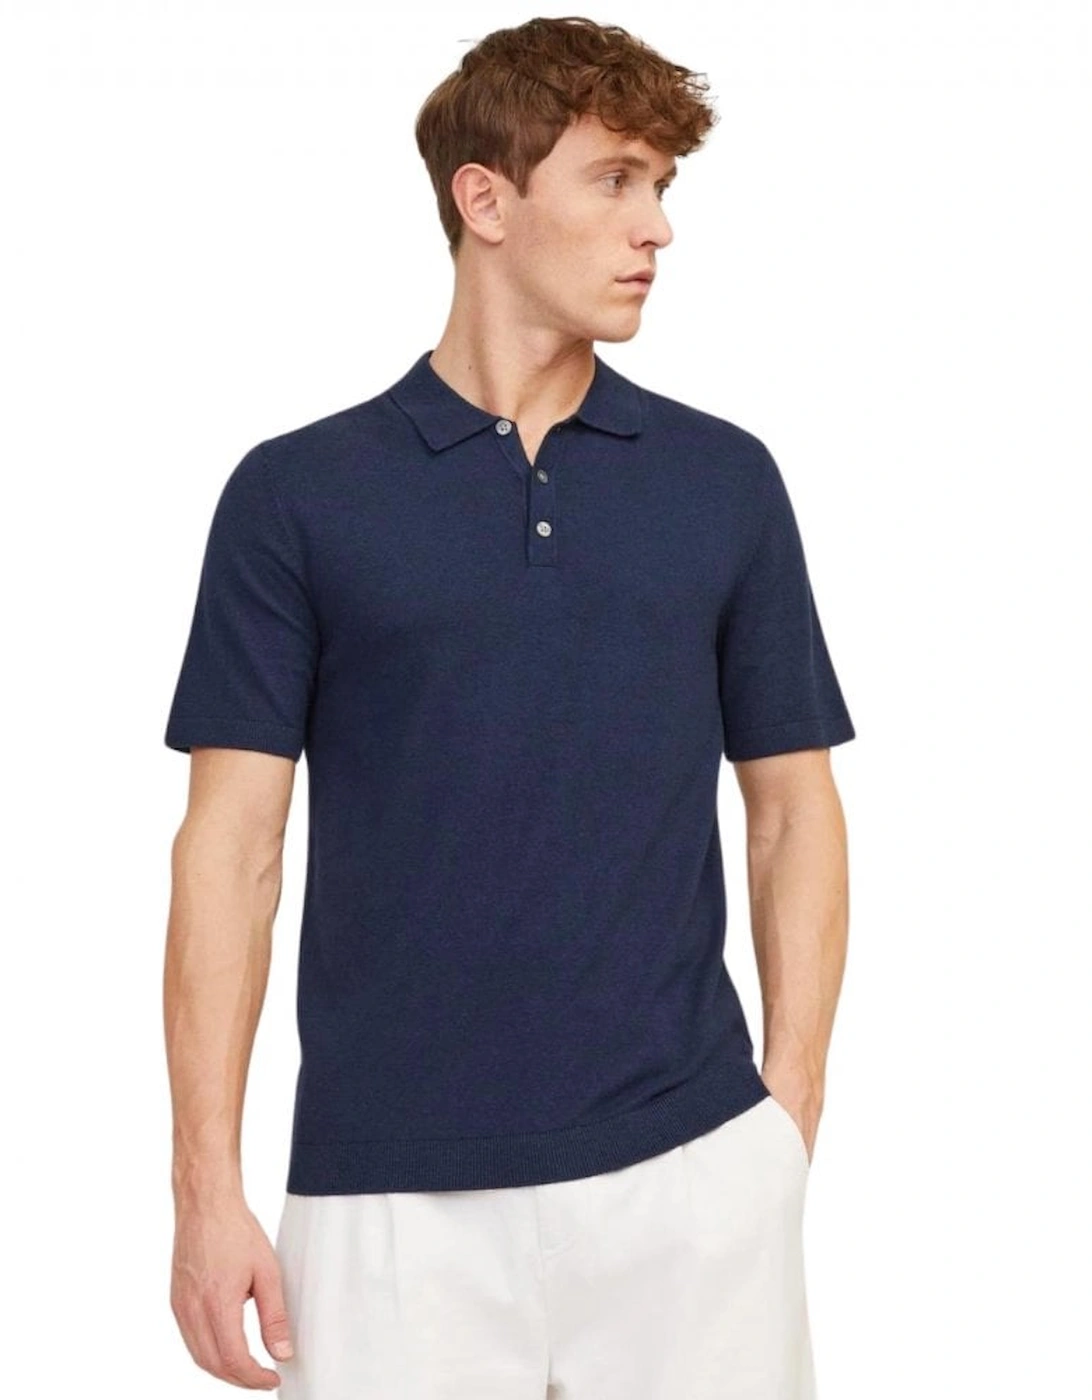 Emil Knitted Polo - Navy Blue